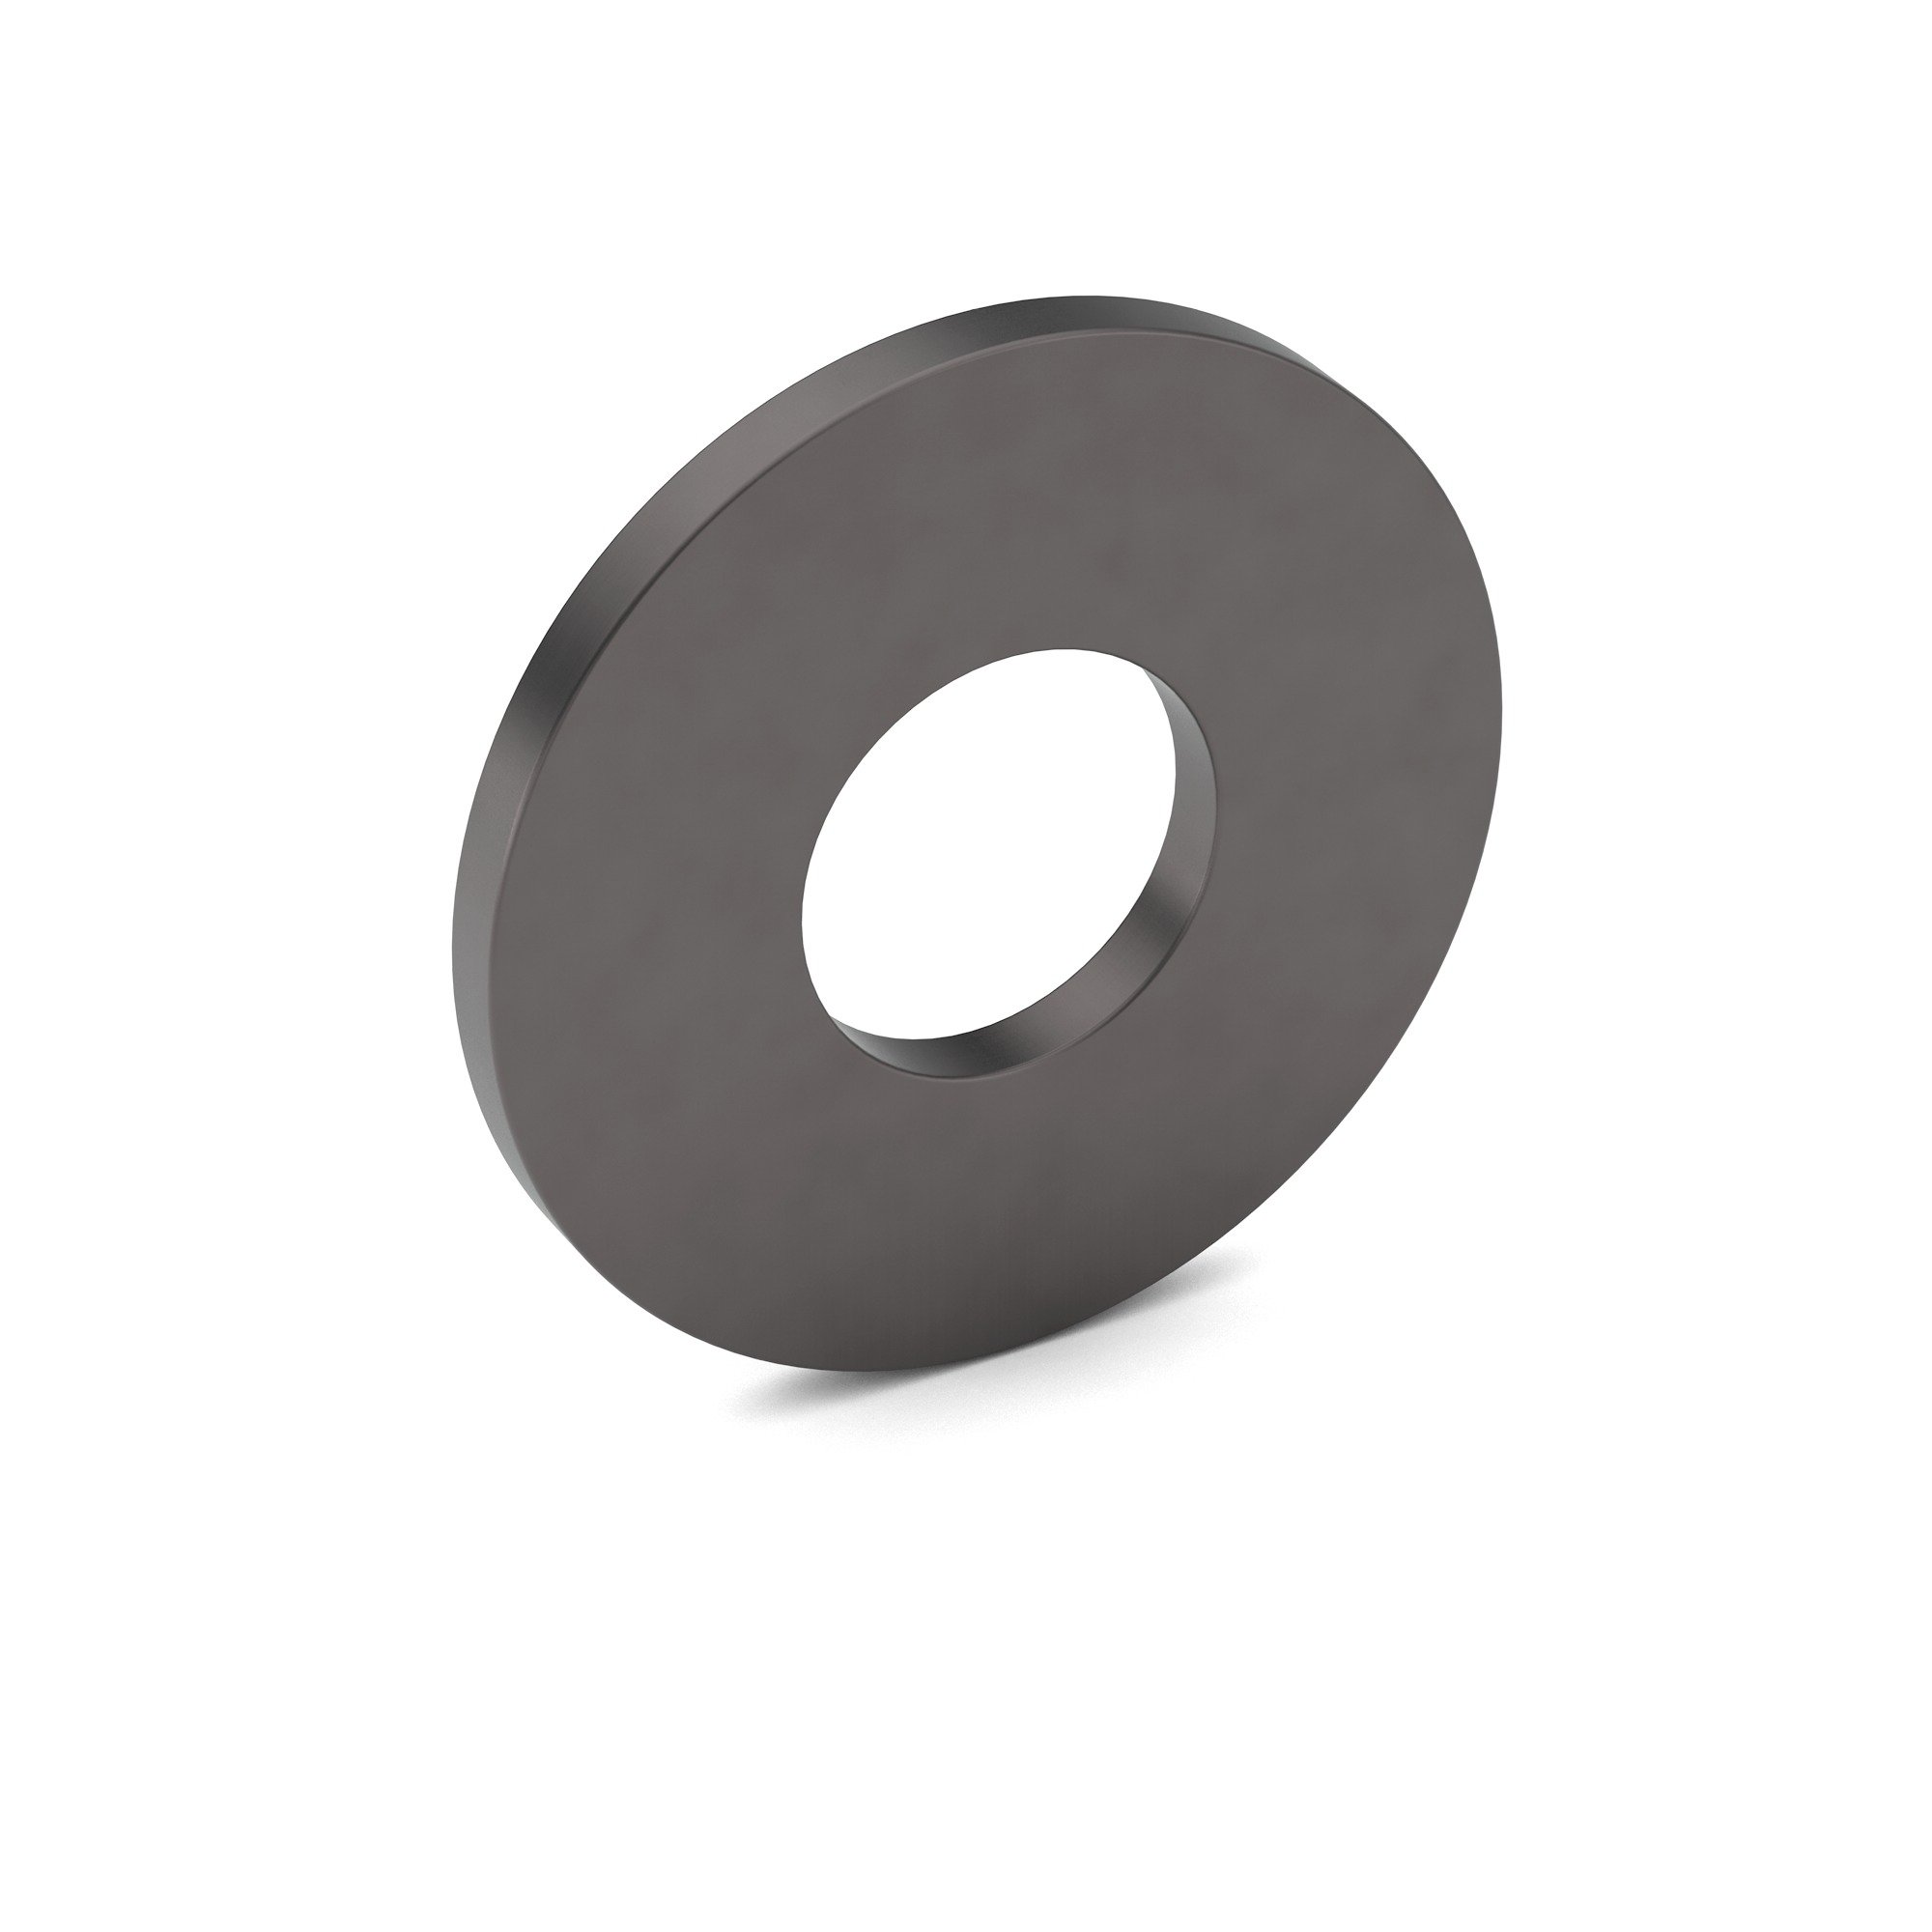 1/4 Carbon Steel USS Flat Washer Plain Finish Pickled No Oil